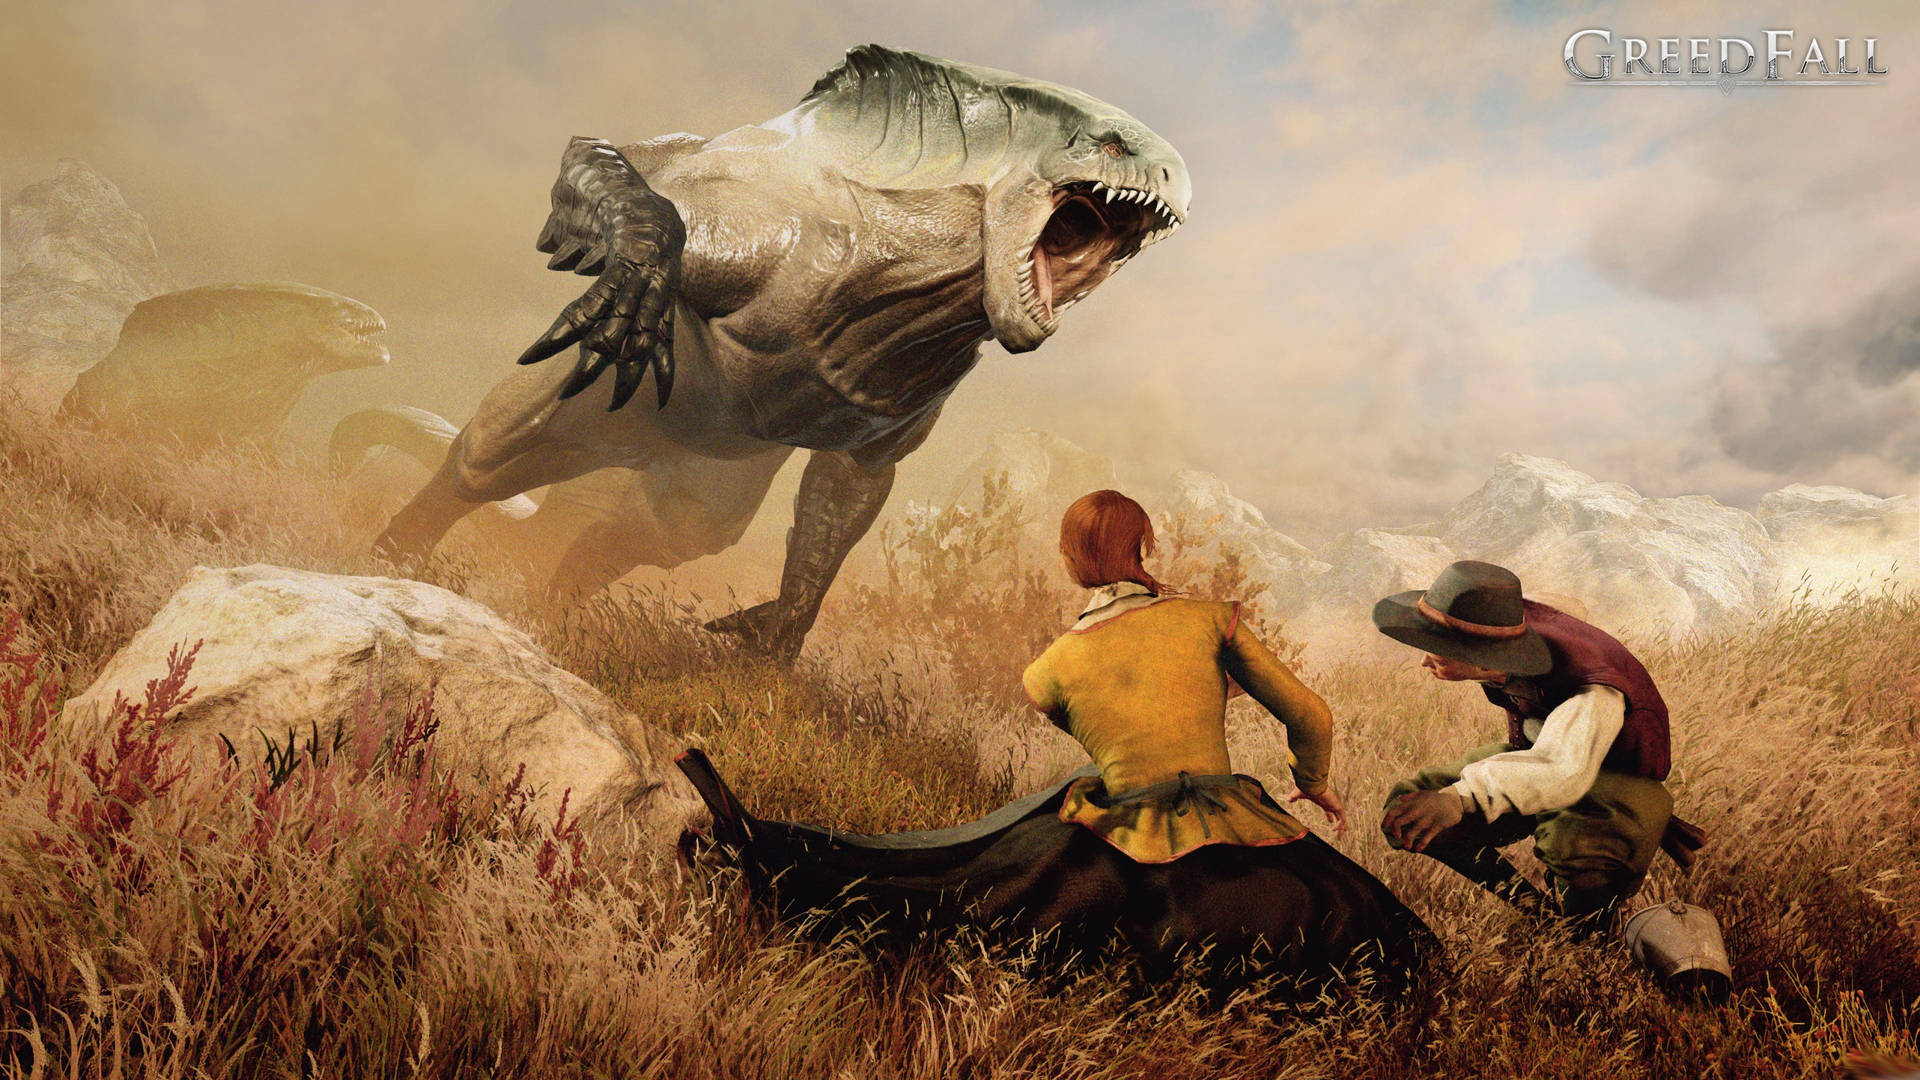 Dinosaur And Greedfall Characters Background